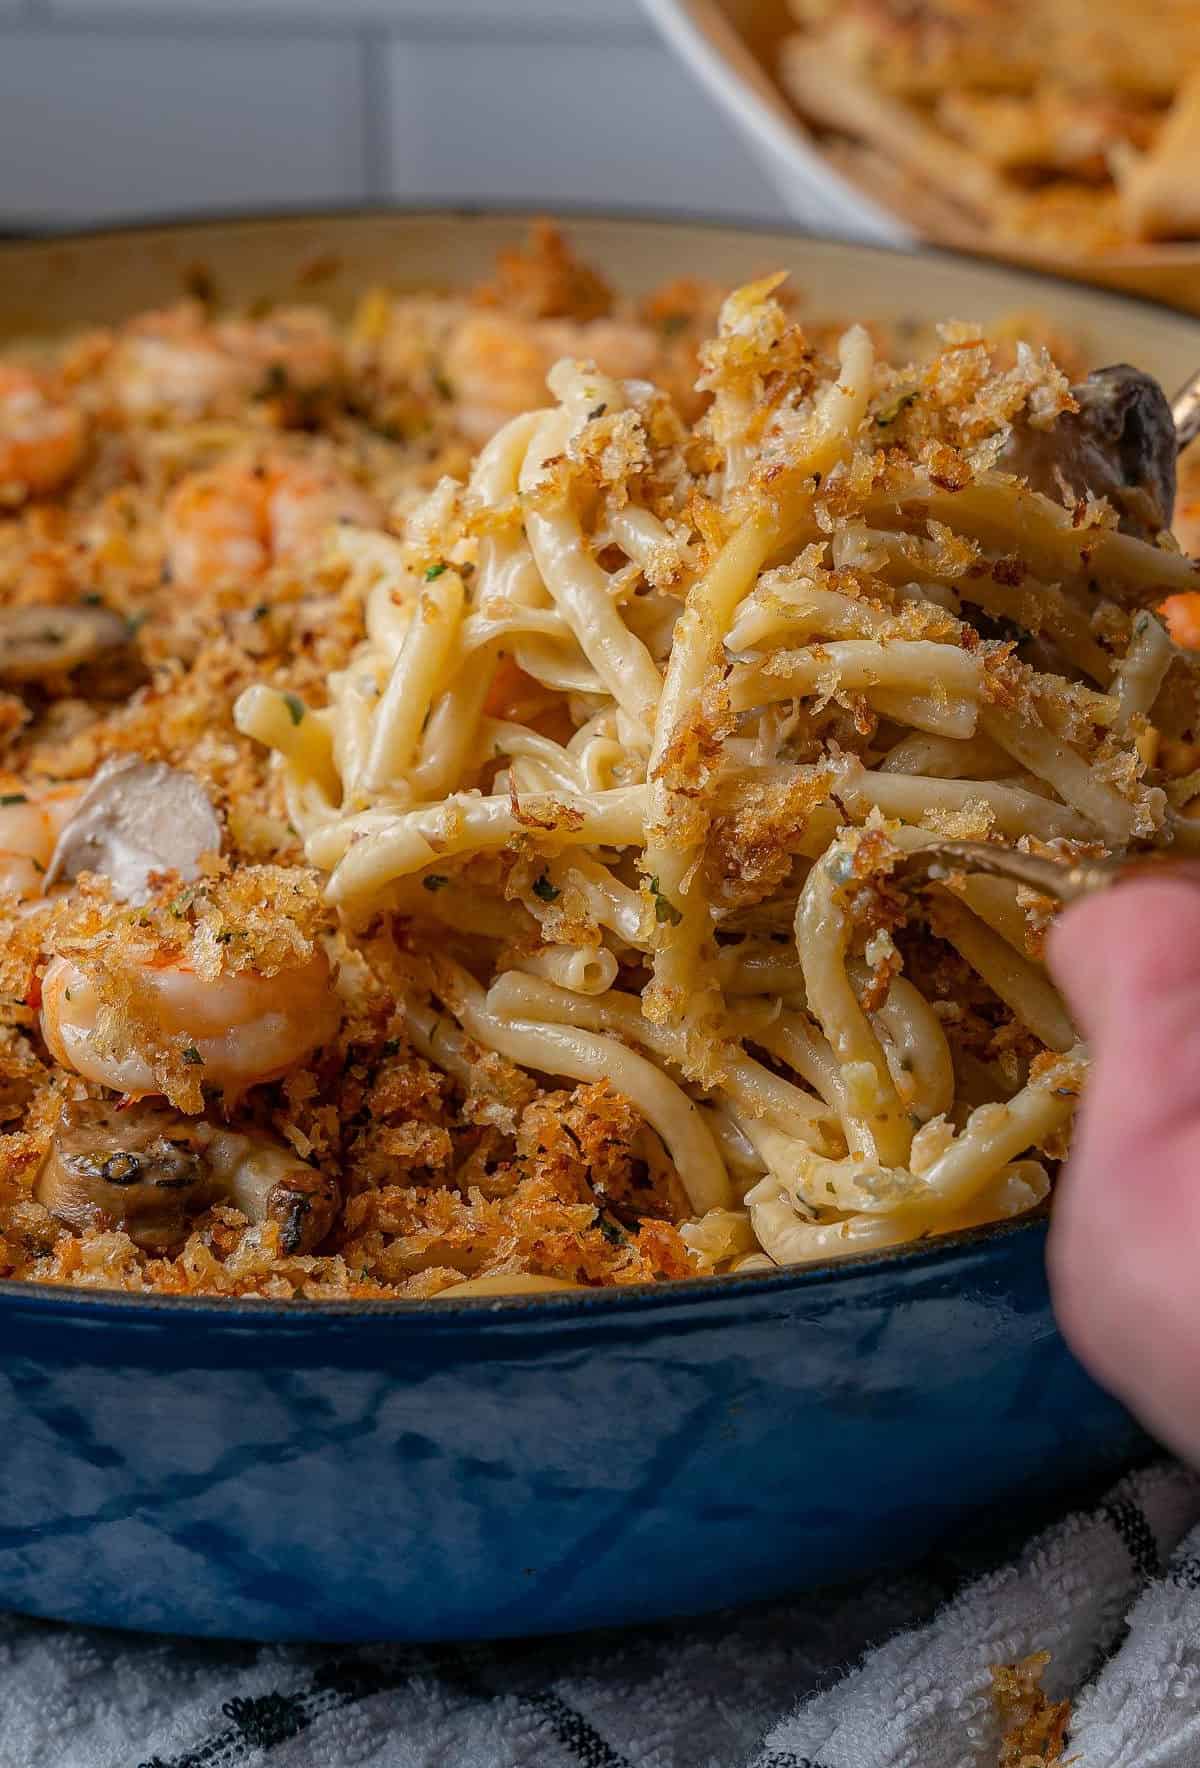  A delightful blend of parmesan cheese and breadcrumbs